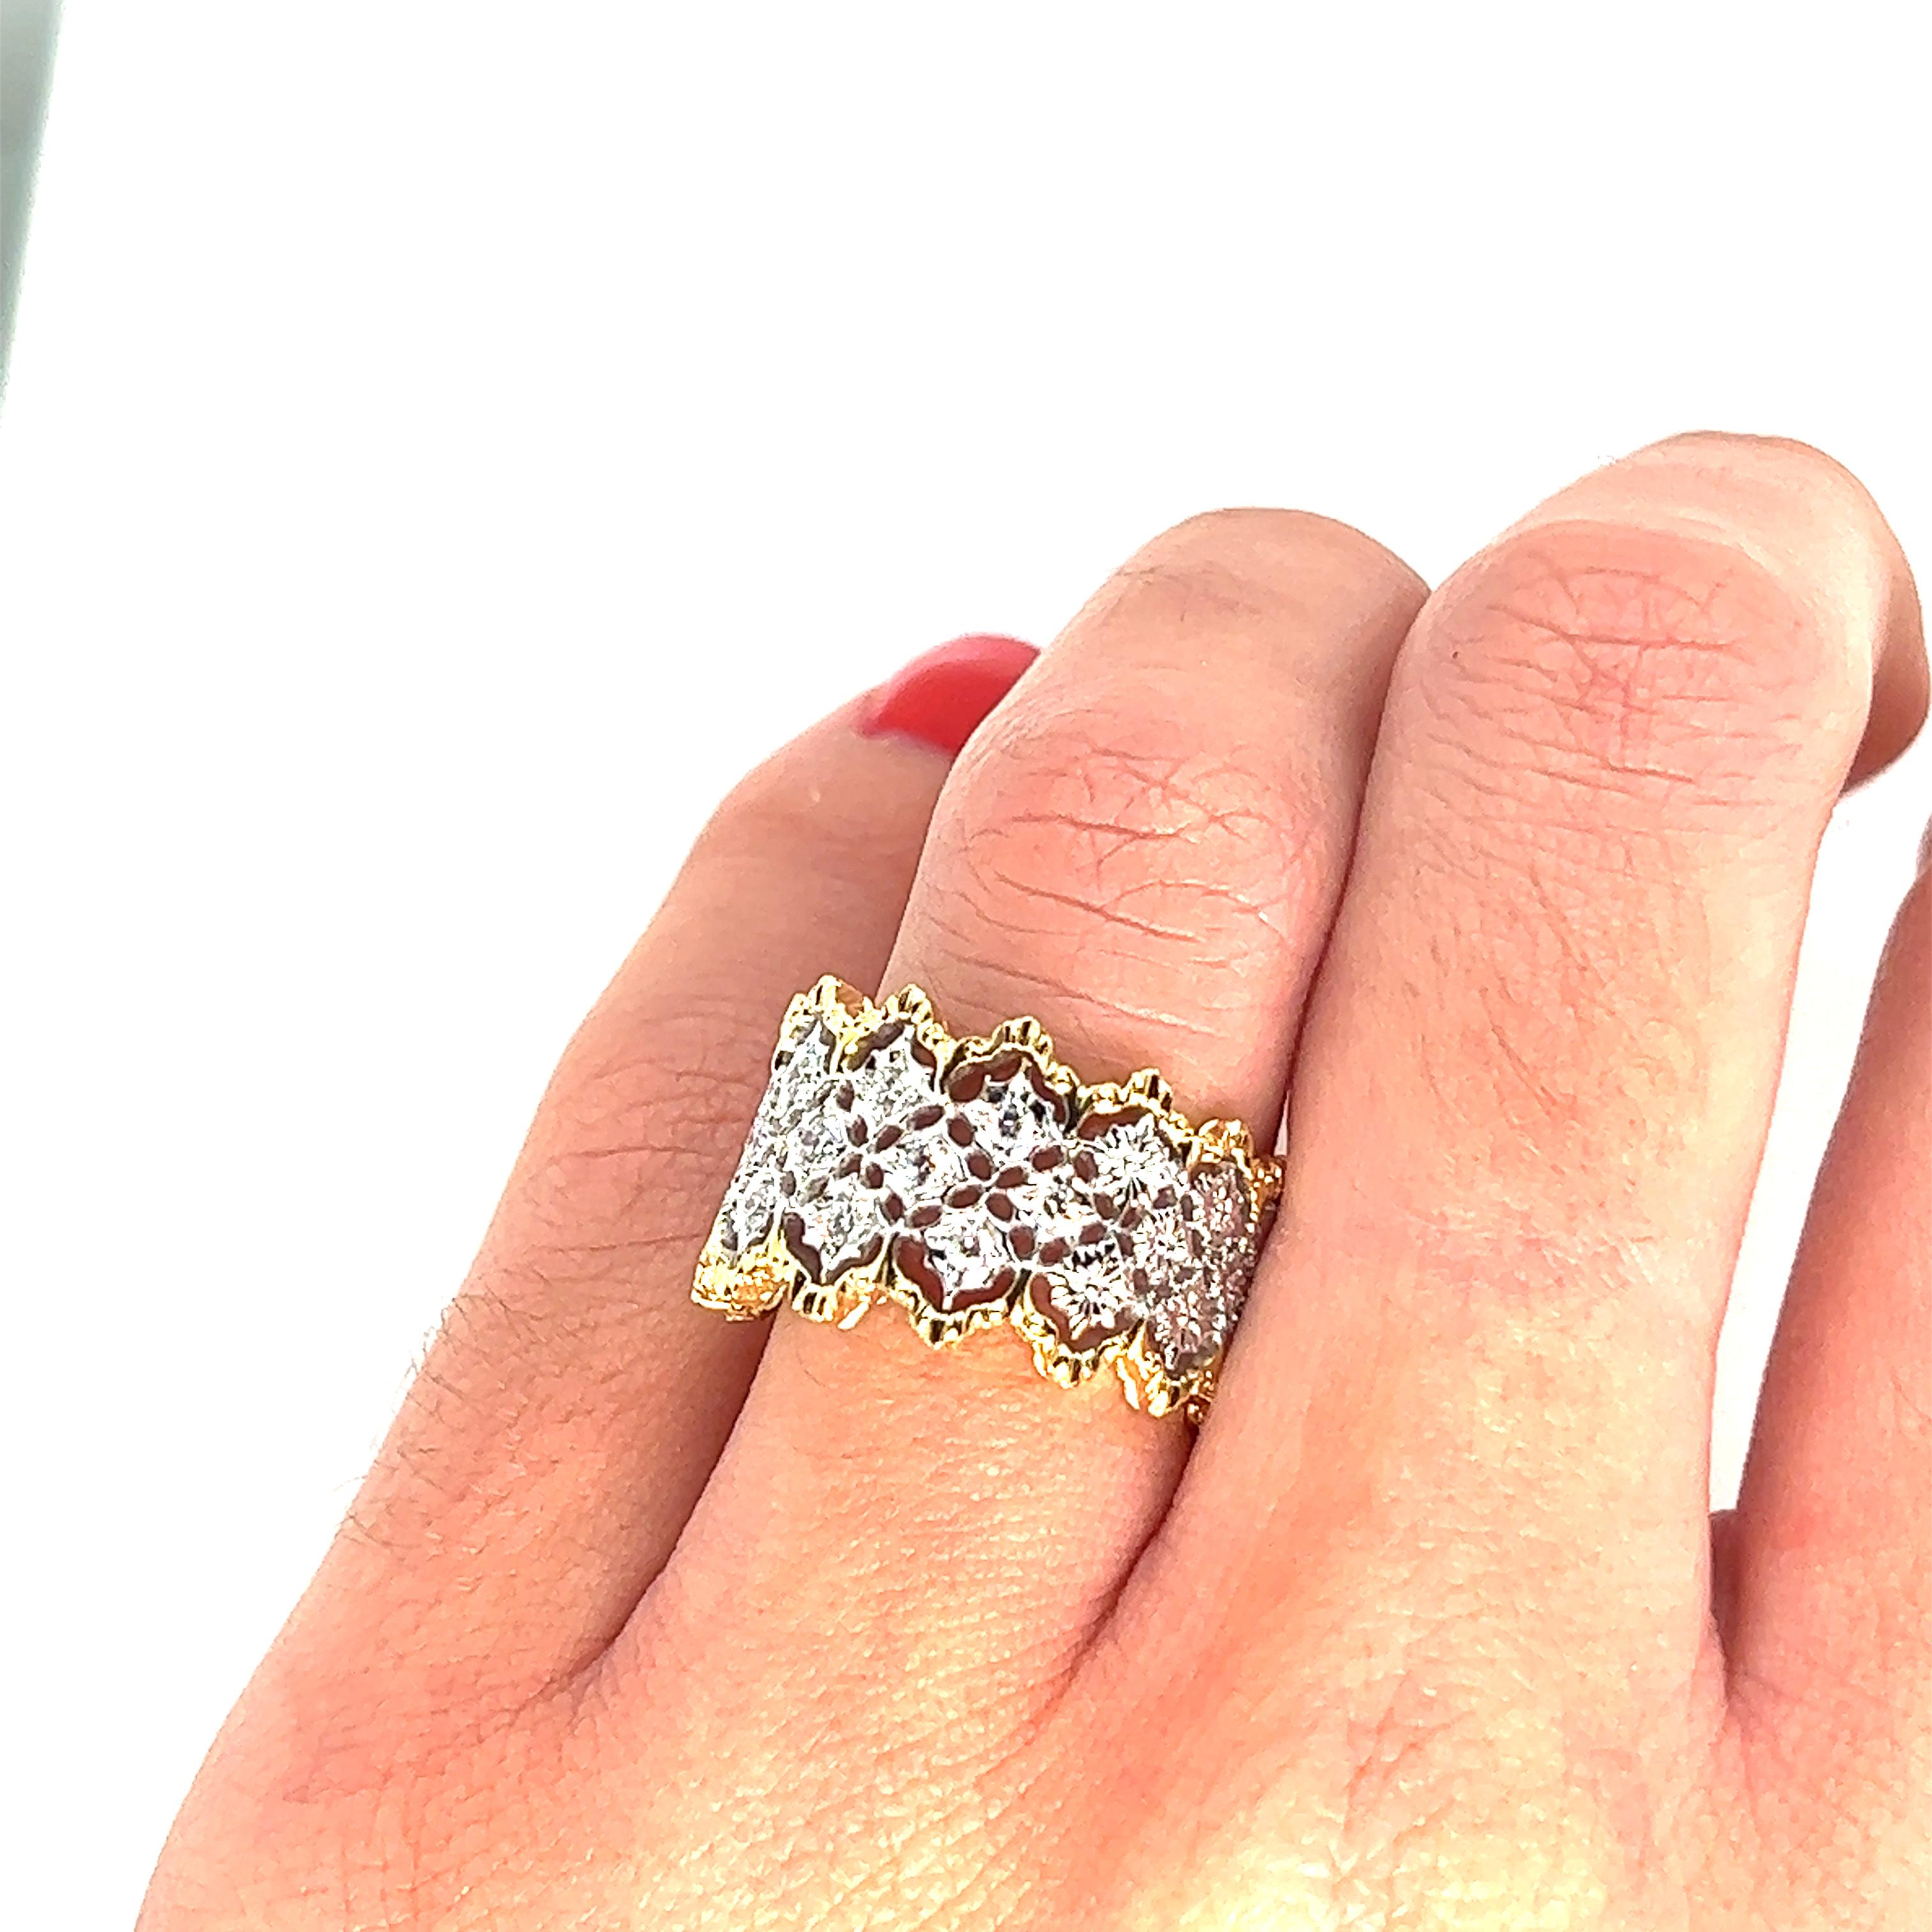 Baroque Lace Ring with 13 Brilliant Cut Diamonds in 18K White and Yellow Gold 4